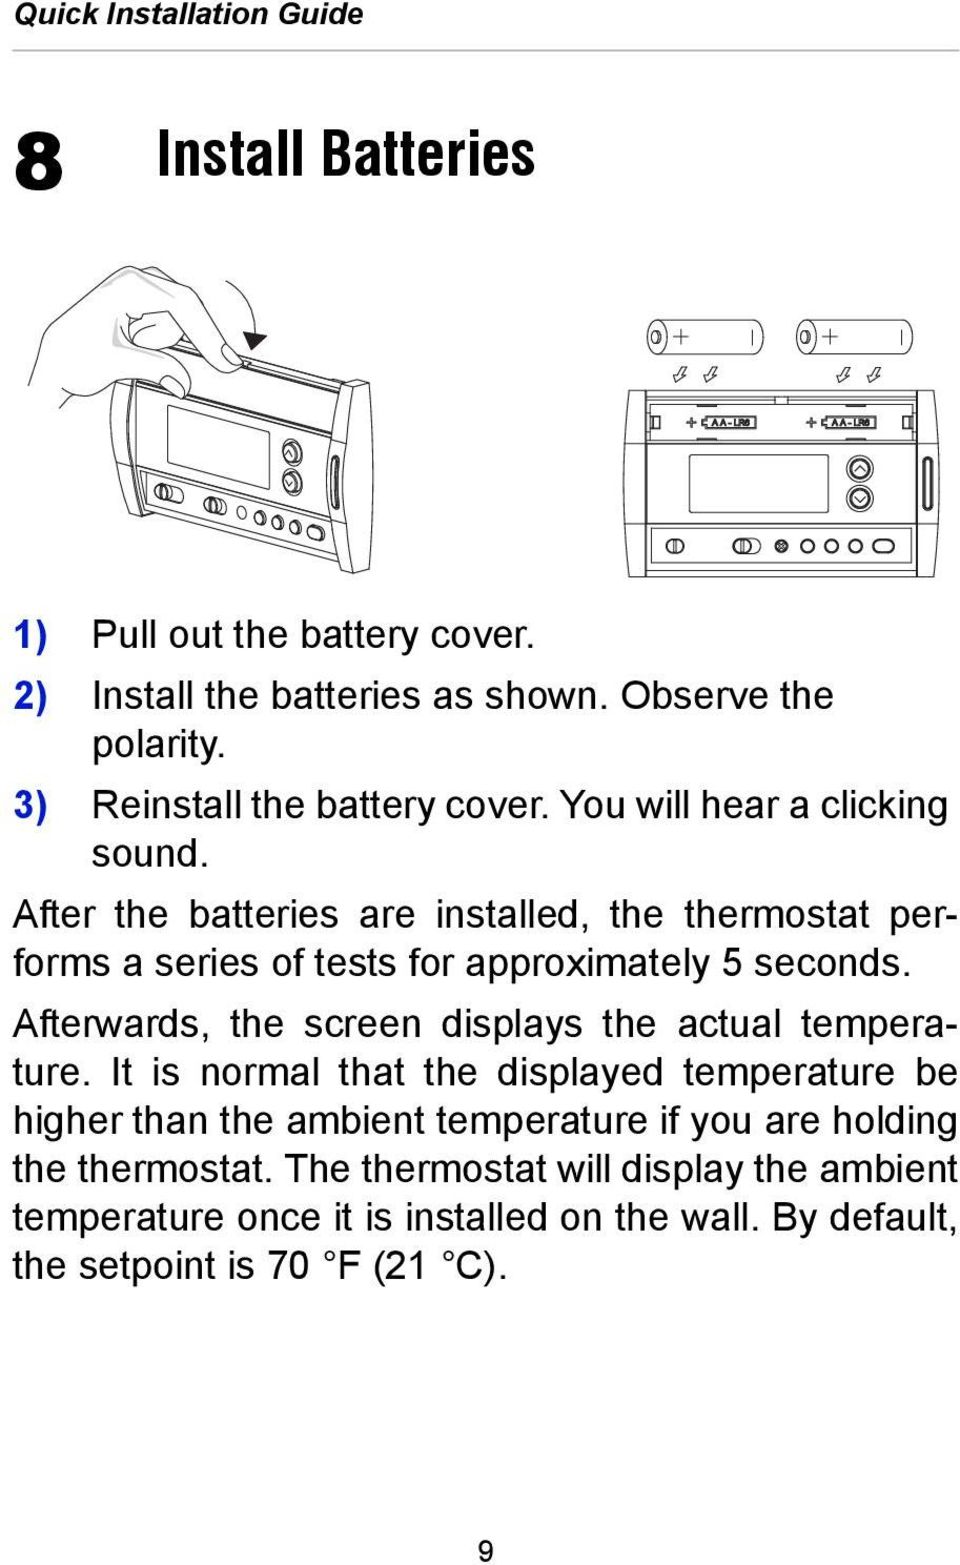 After the batteries are installed, the thermostat performs a series of tests for approximately 5 seconds.